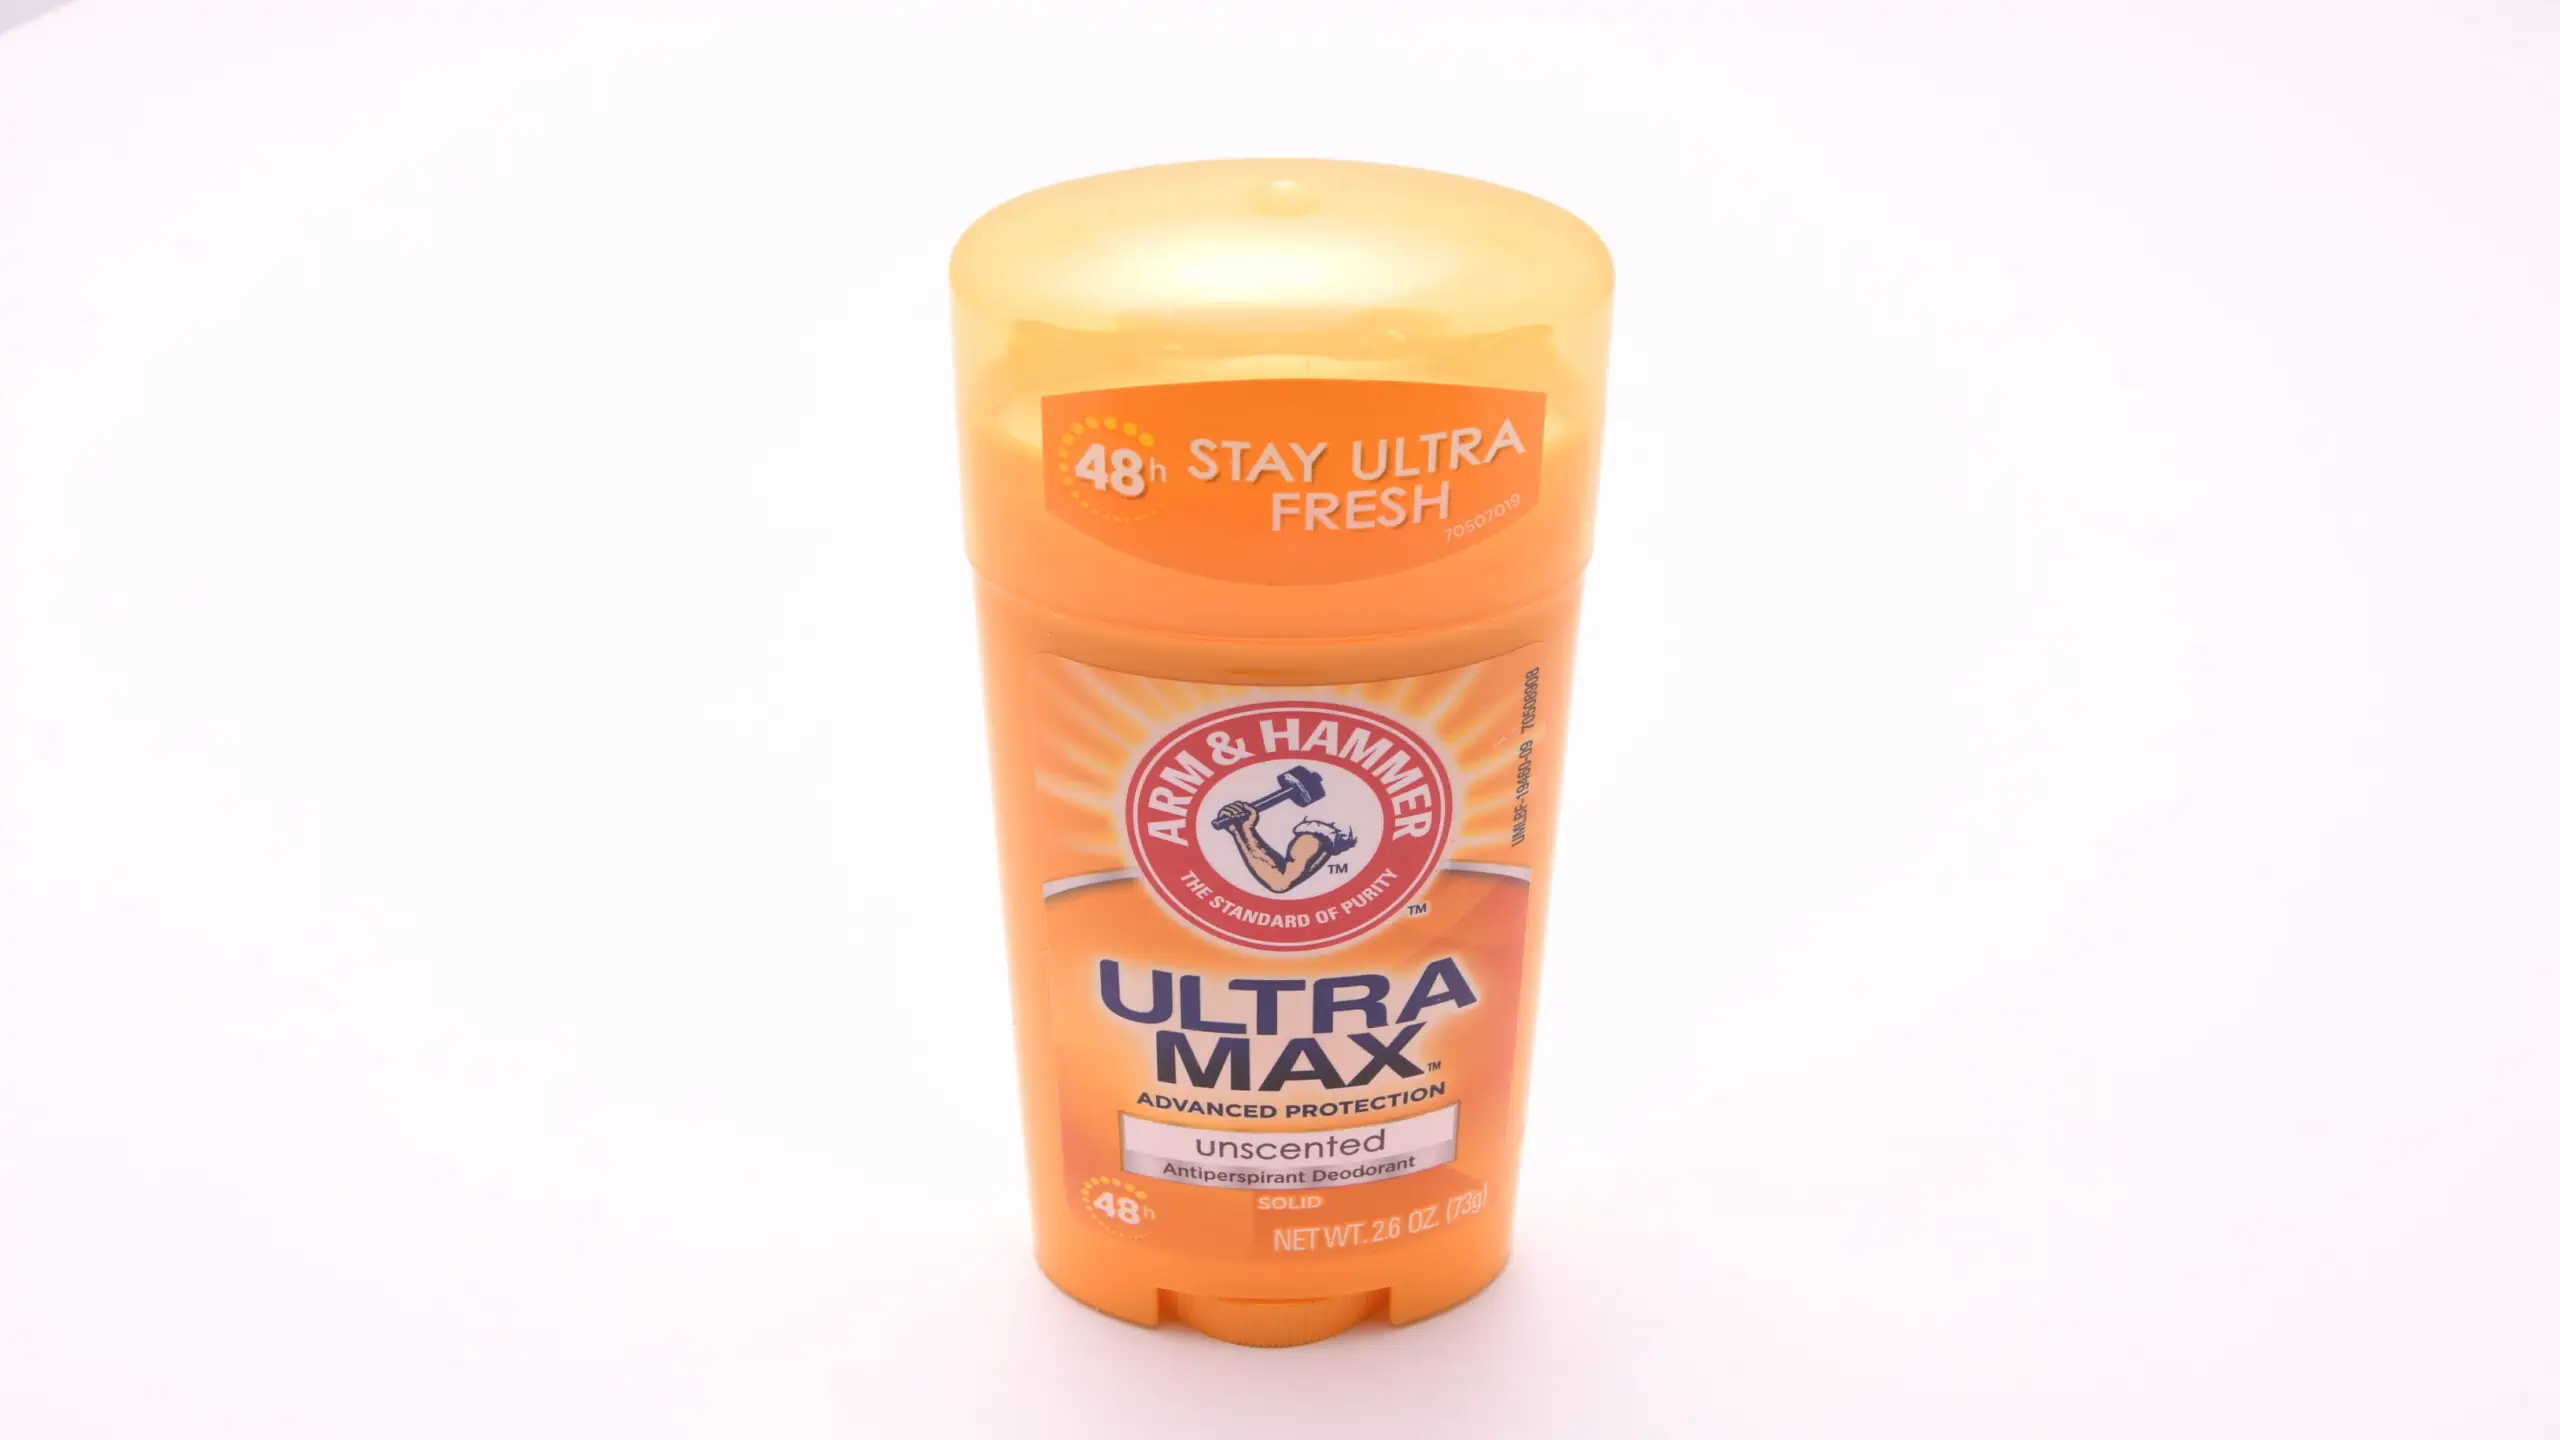 A combination deodorant/antiperspirant from Arm & Hammer, marketed as "unscented."